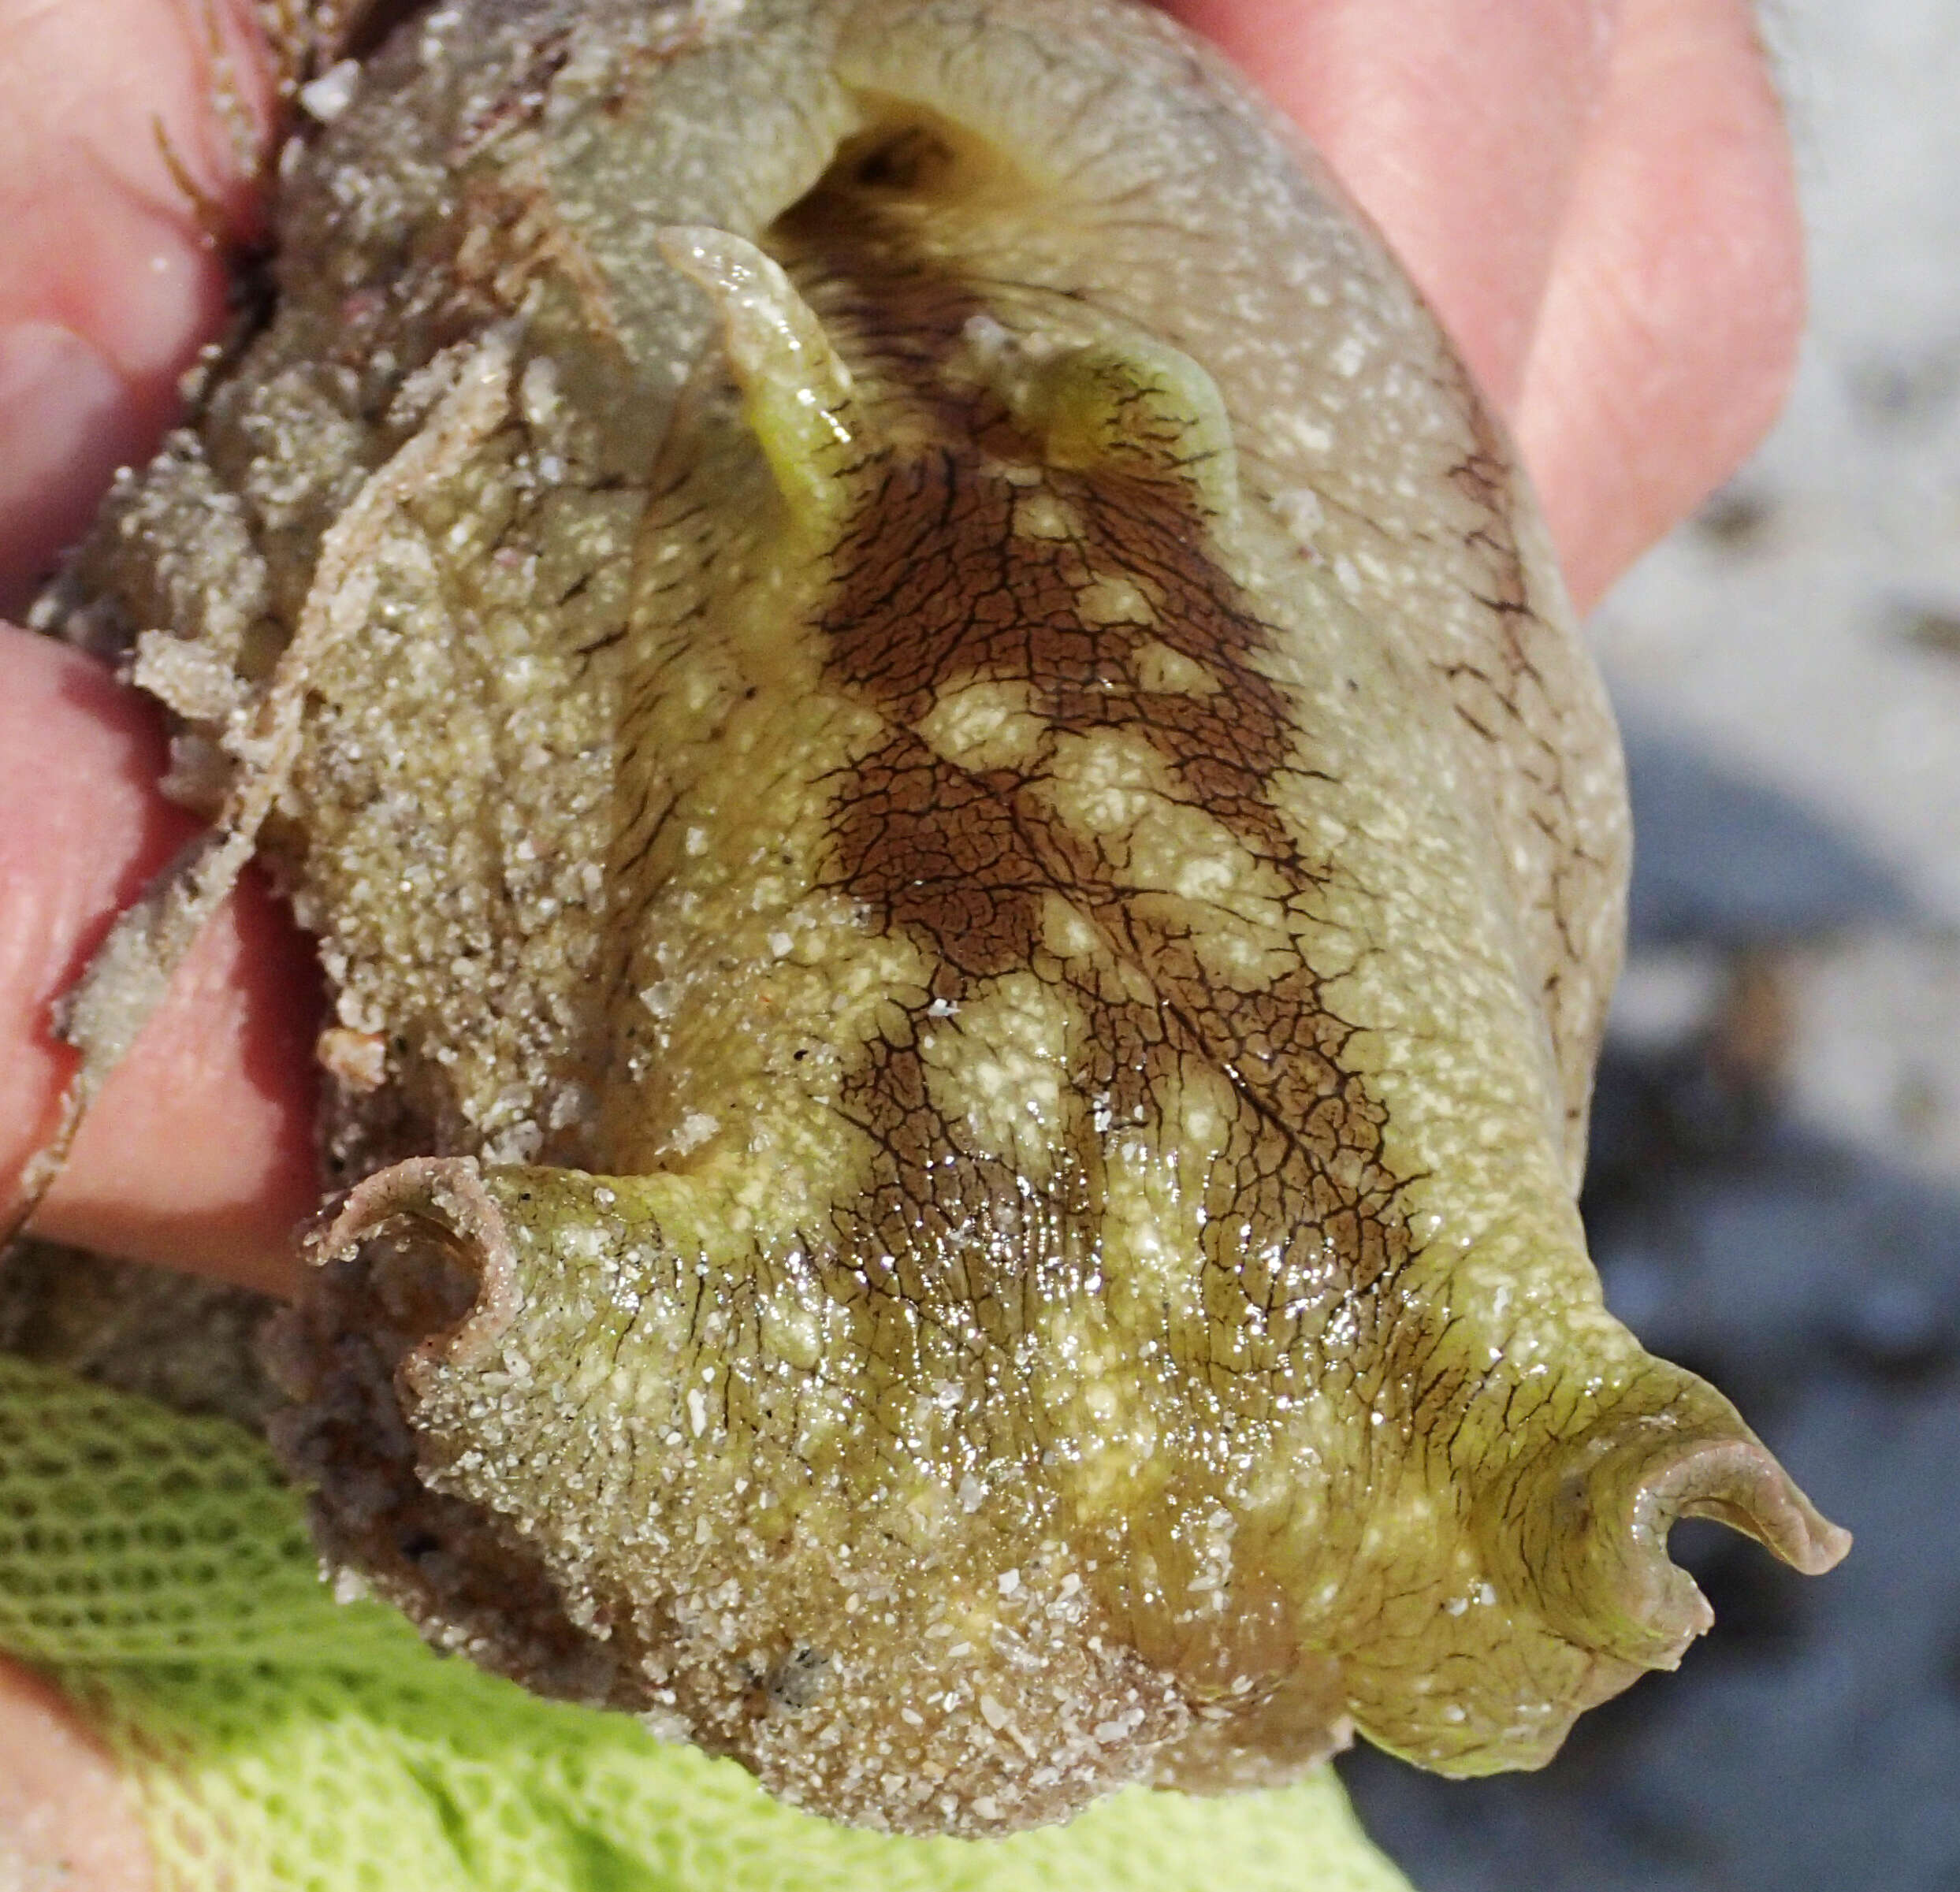 Image of banded sea hare